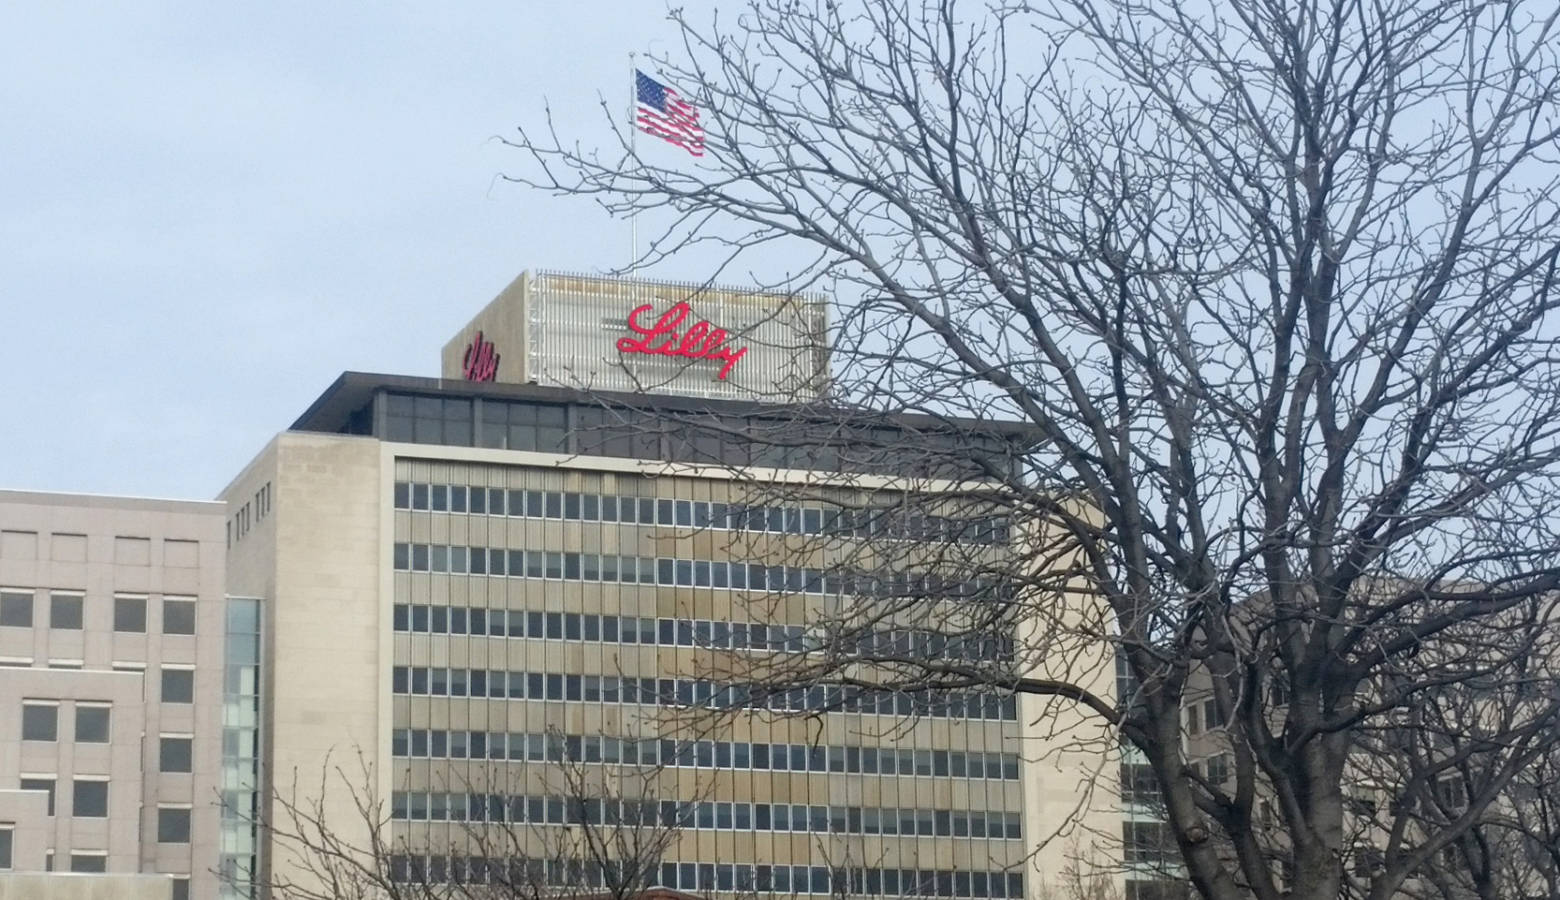 Eli Lilly Corporate Headquarters in Indianapolis